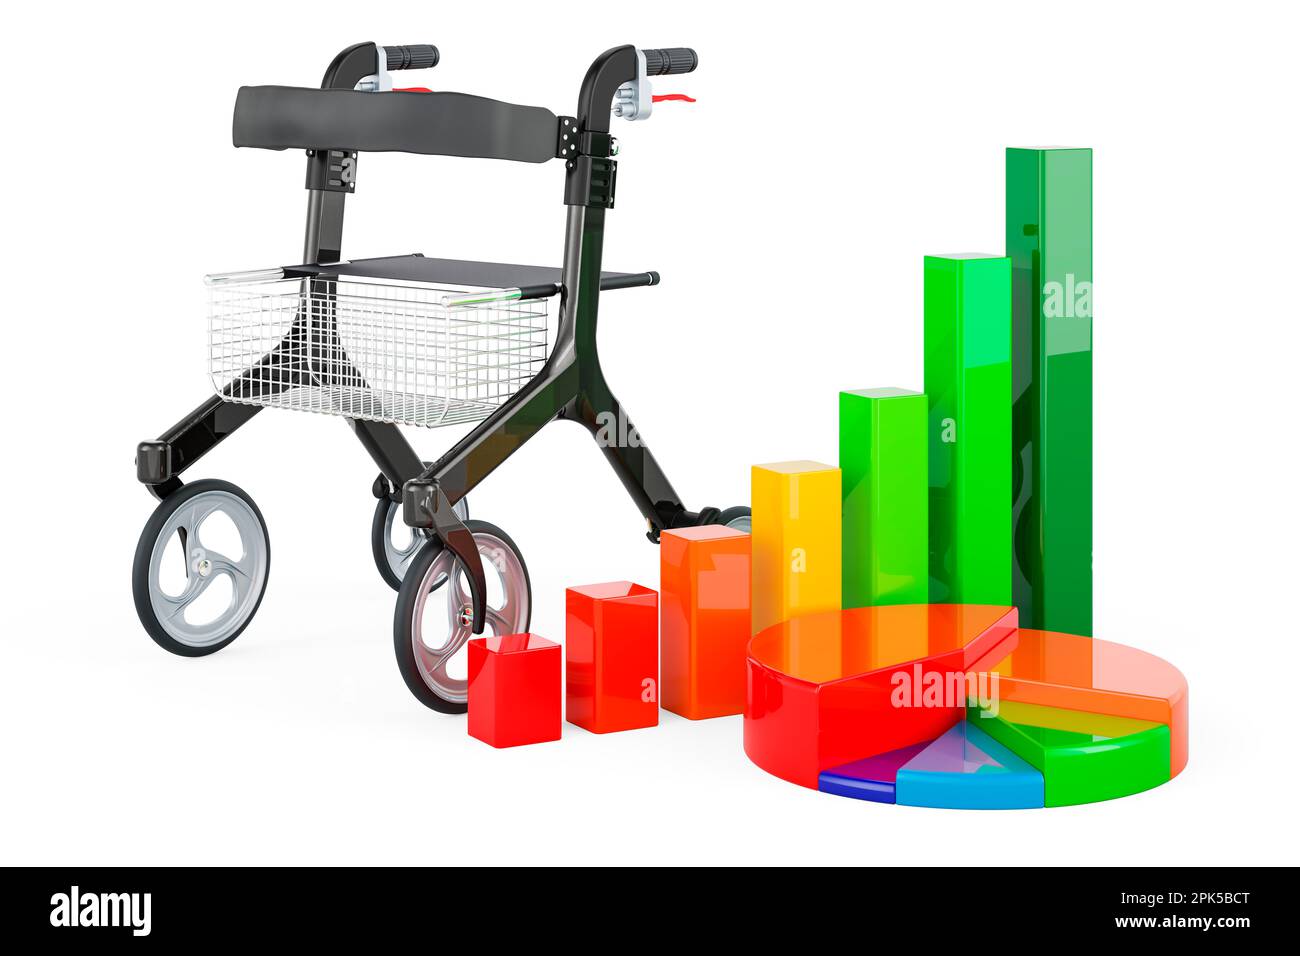 Rollator for elderly with growth bar graph and pie chart. 3D rendering isolated on white background Stock Photo